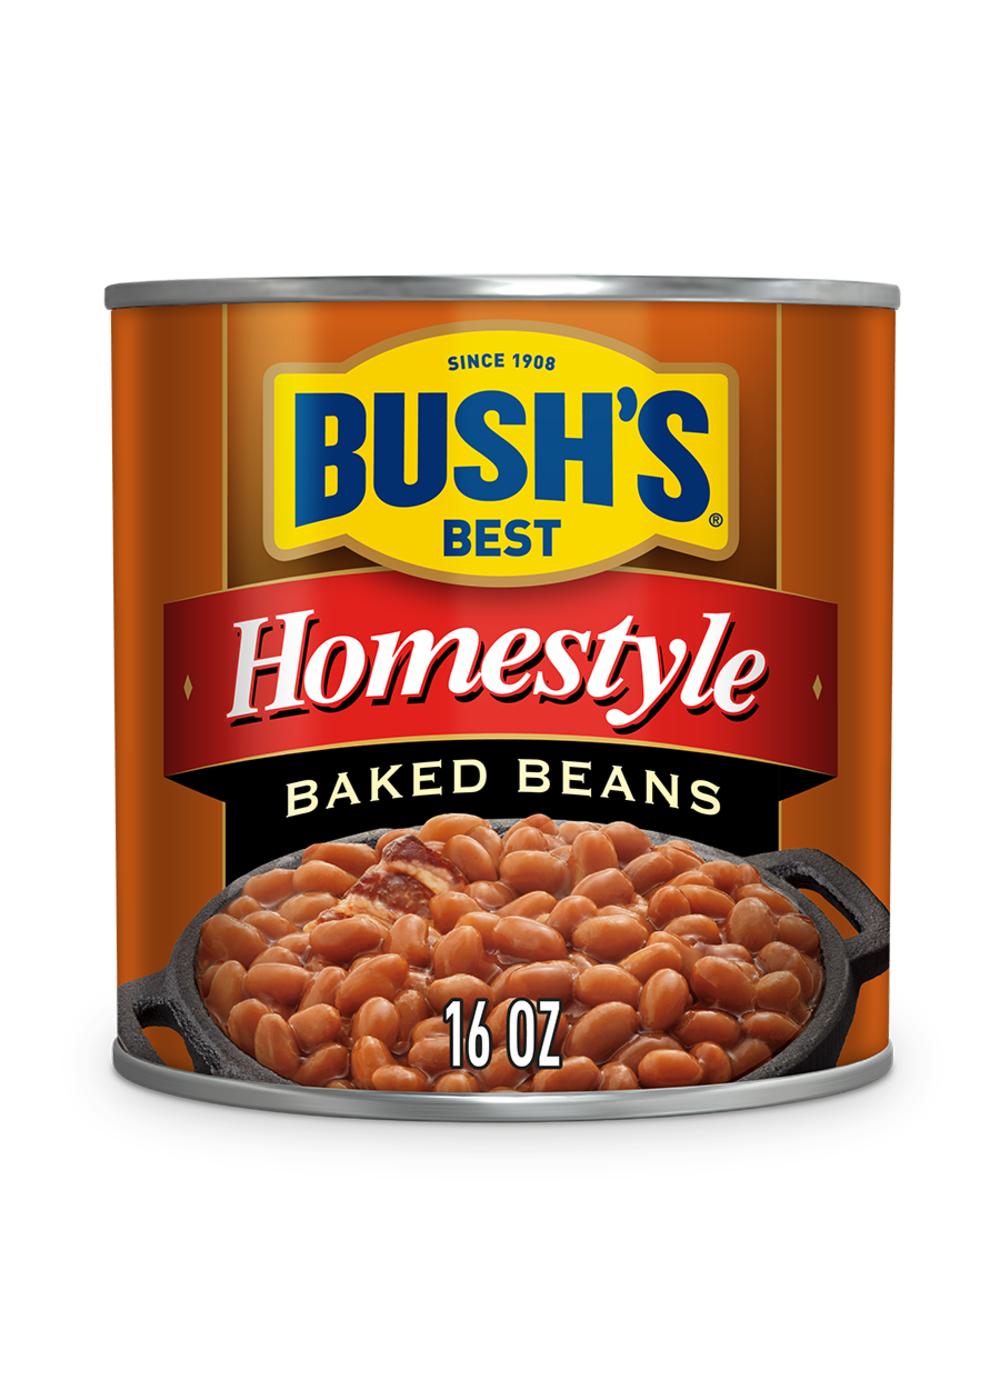 Bush's Best Homestyle Baked Beans; image 1 of 3